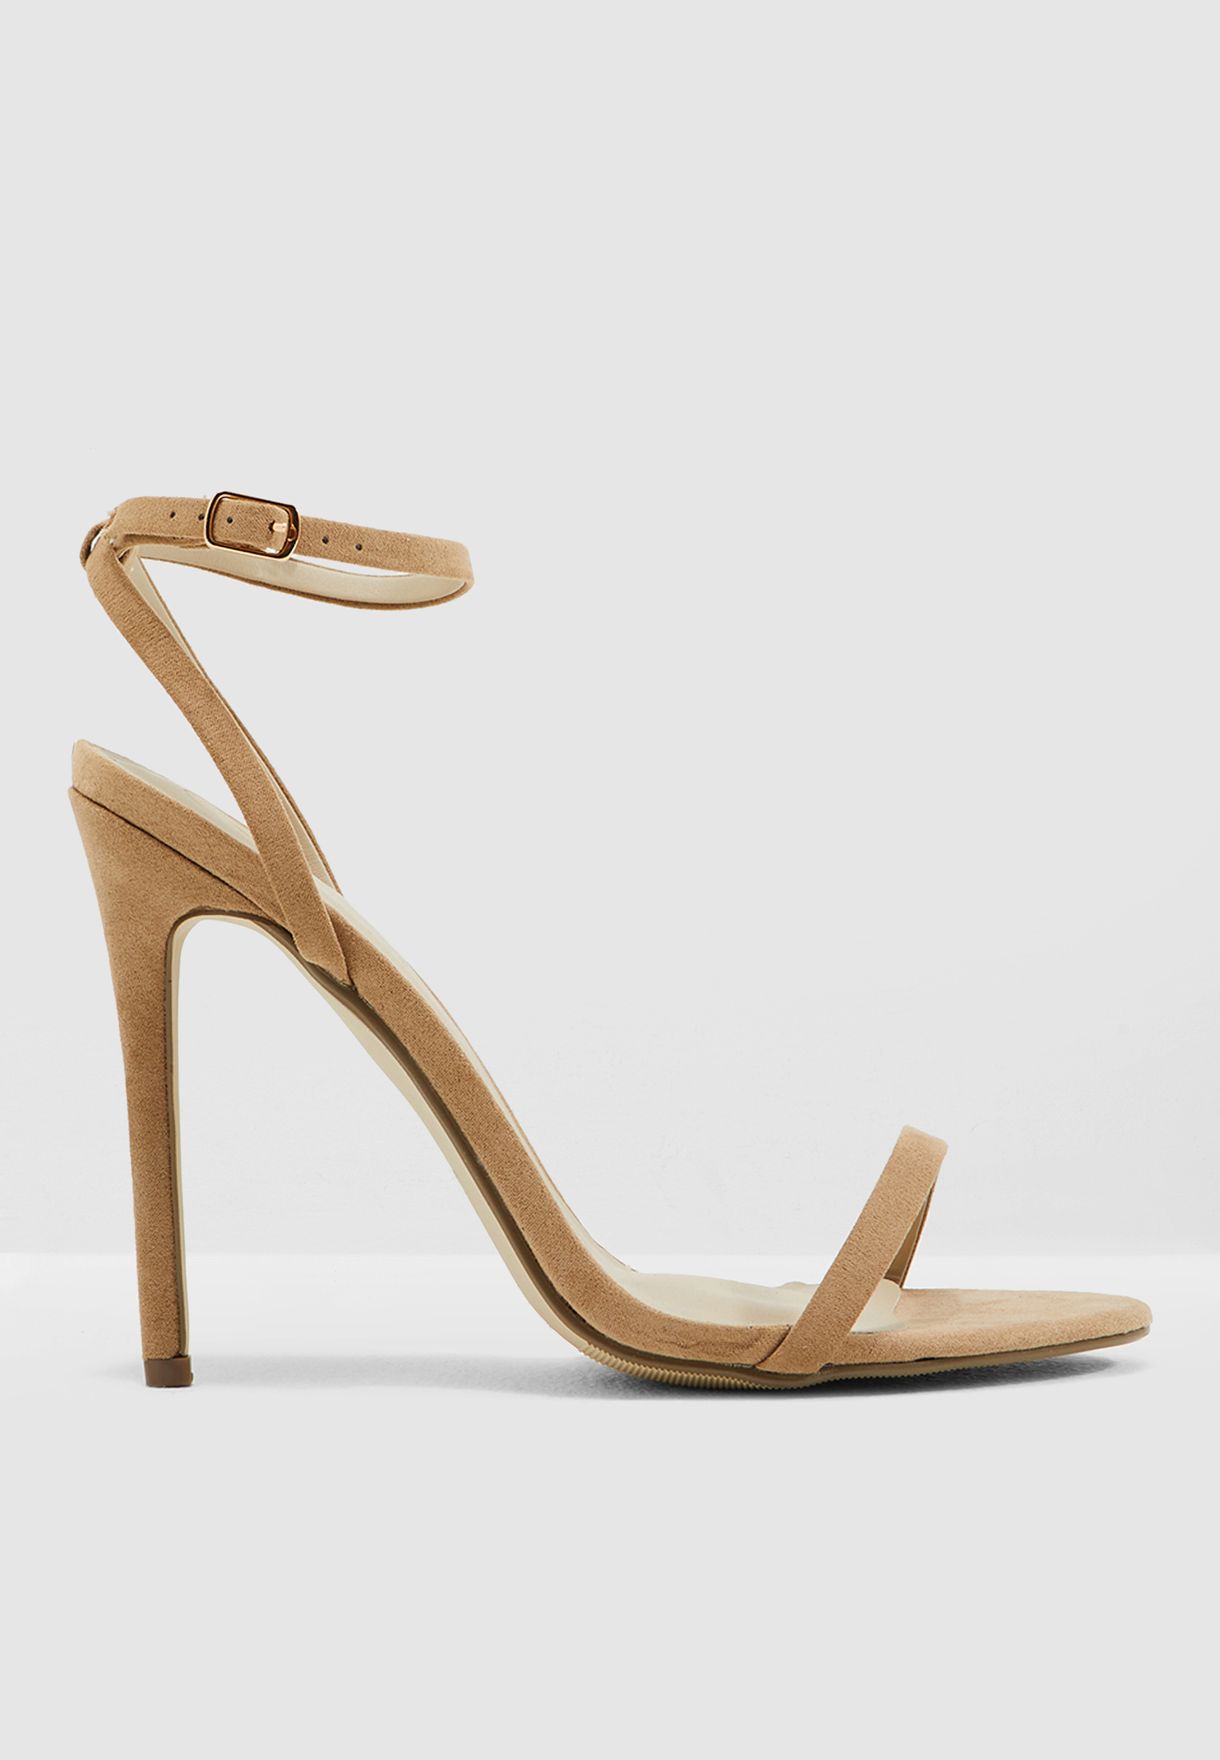 Basic Barely There Heels - Nude